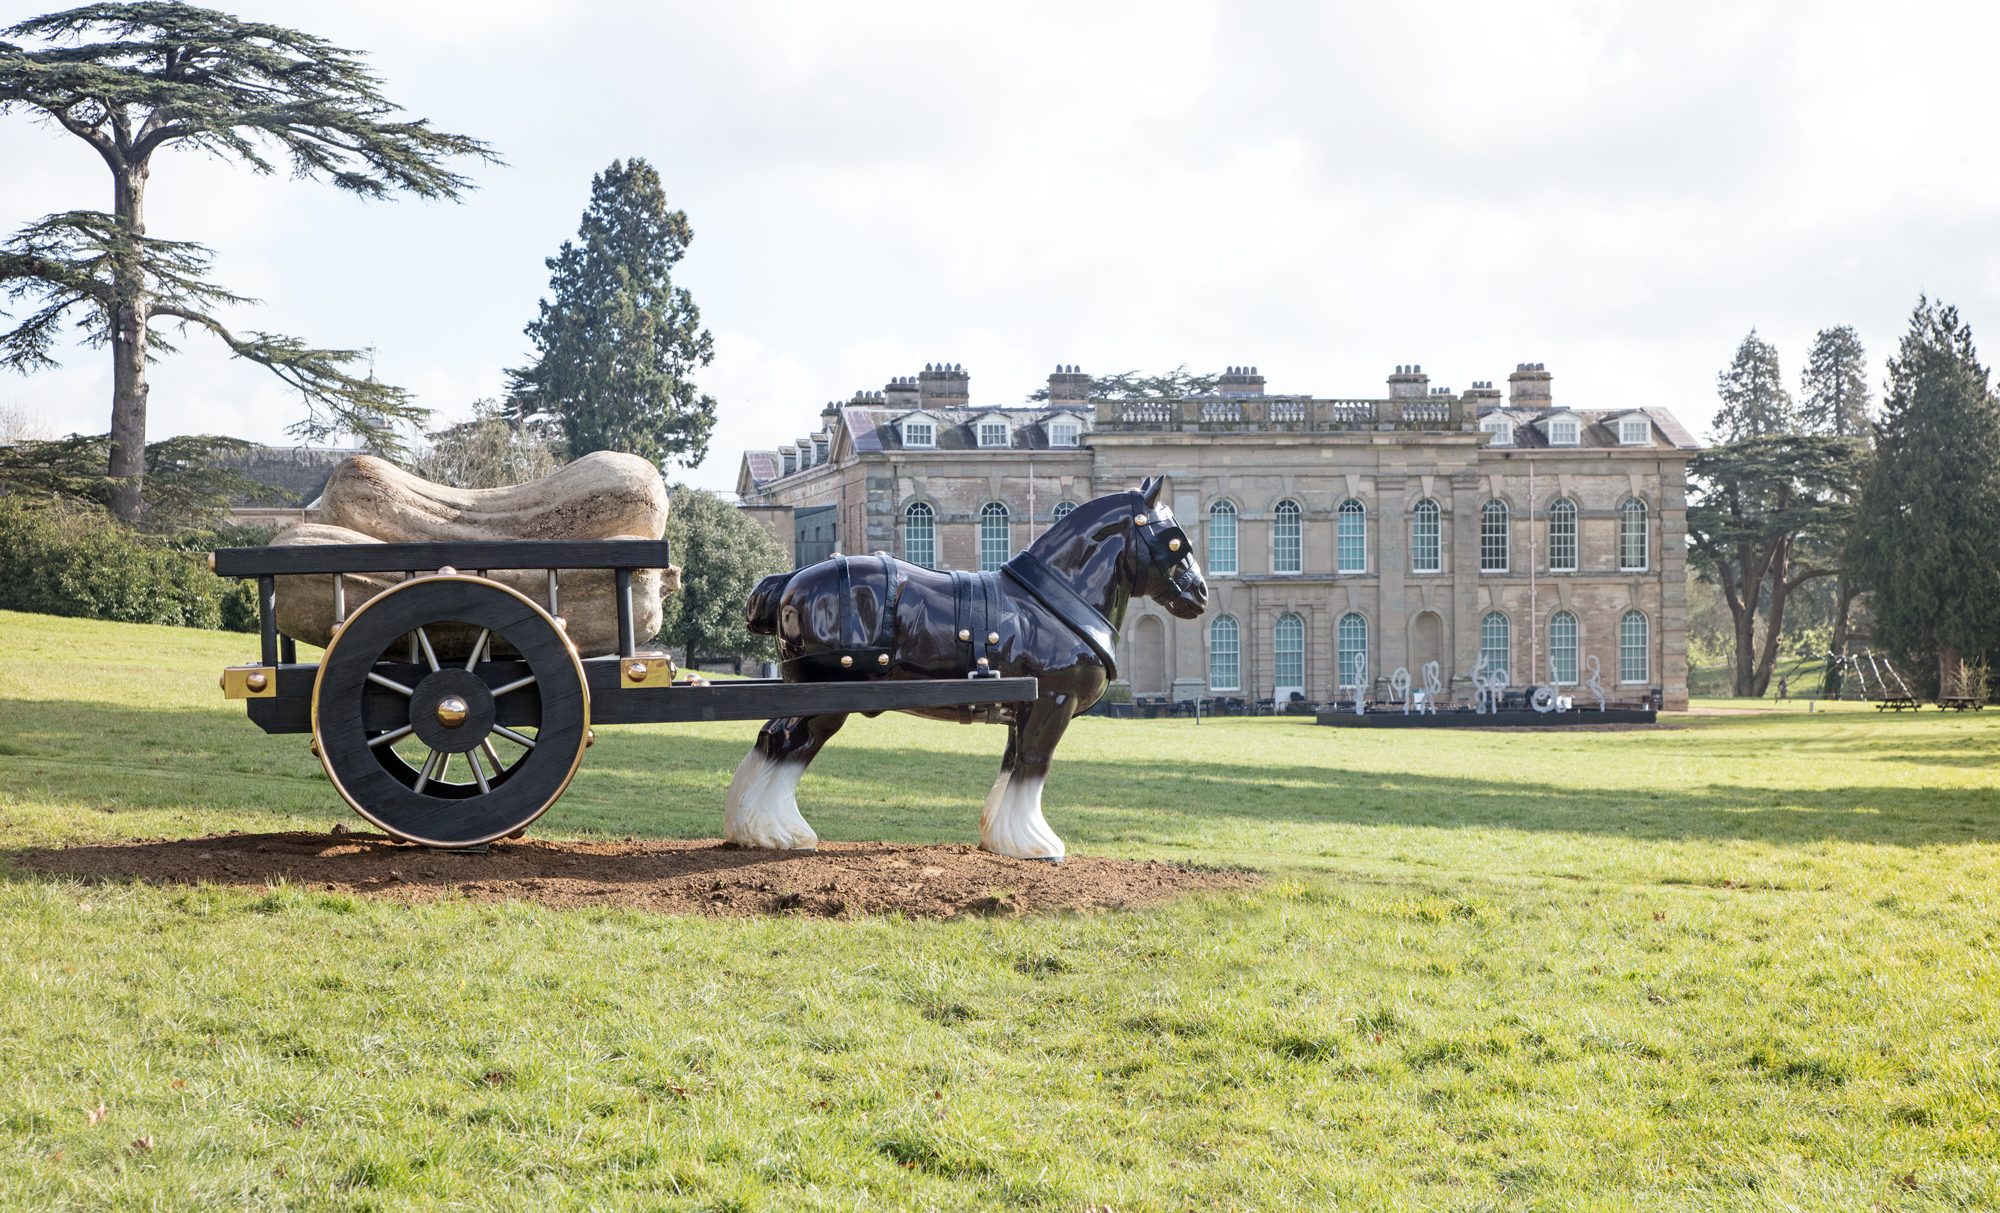 A sculpture of a horse and carriage stands in a meadow overlooking a neoclassical building